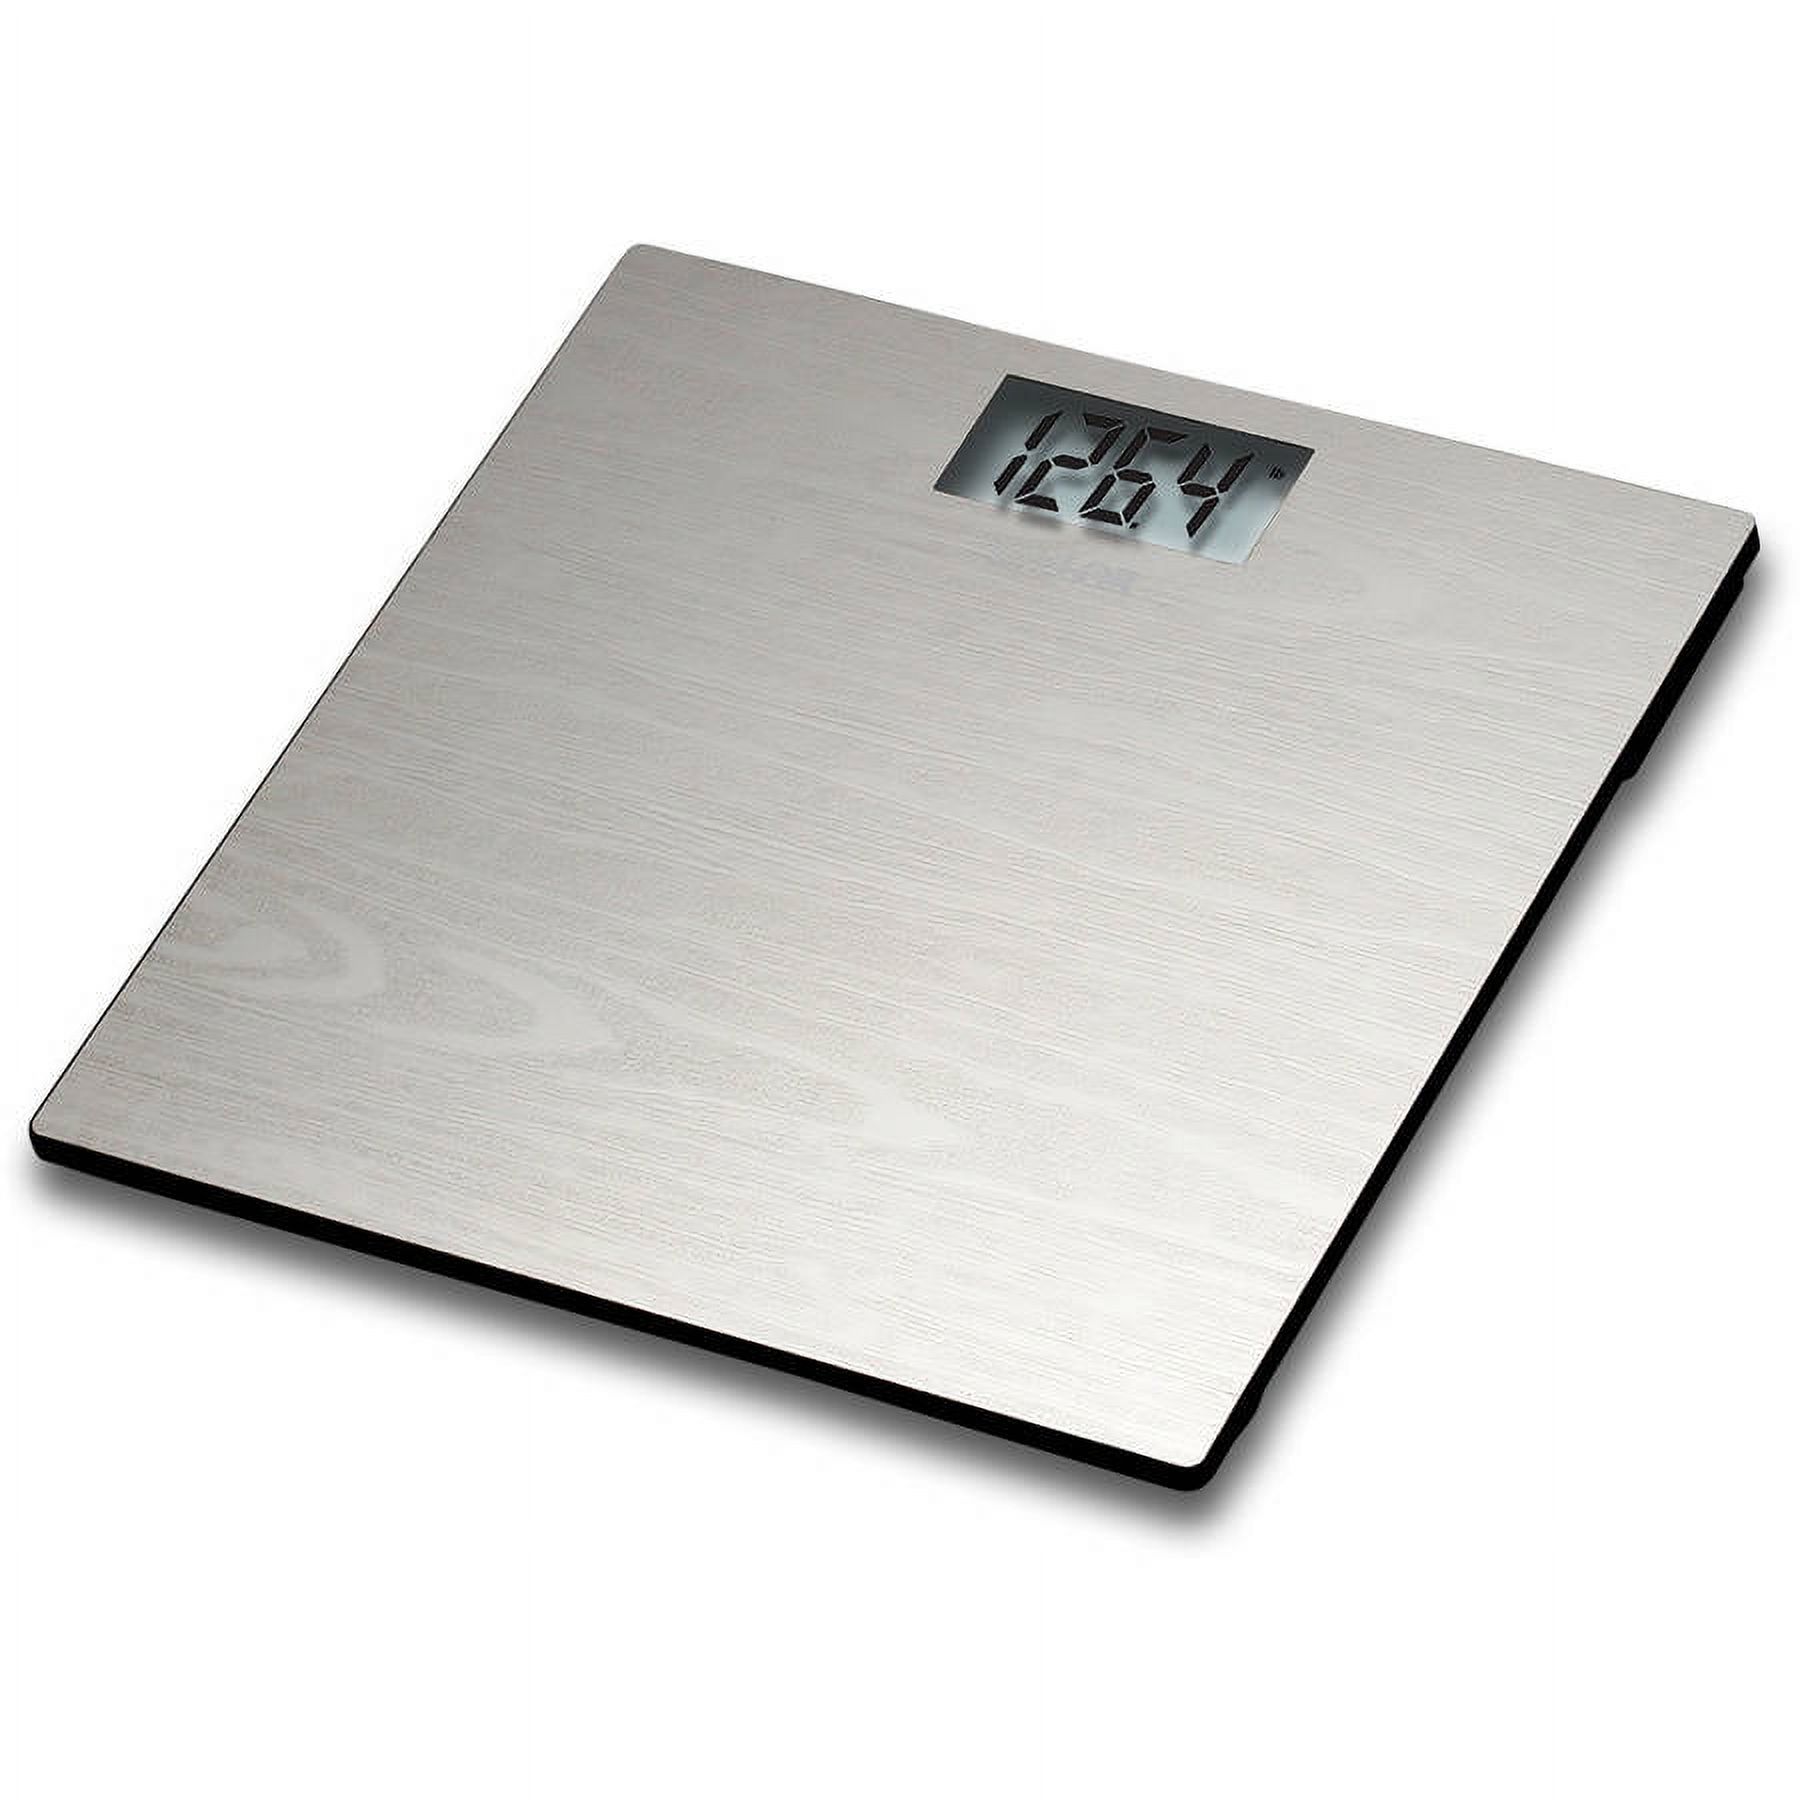 Taylor 7414 Stainless Steel Electronic Scale - image 2 of 5